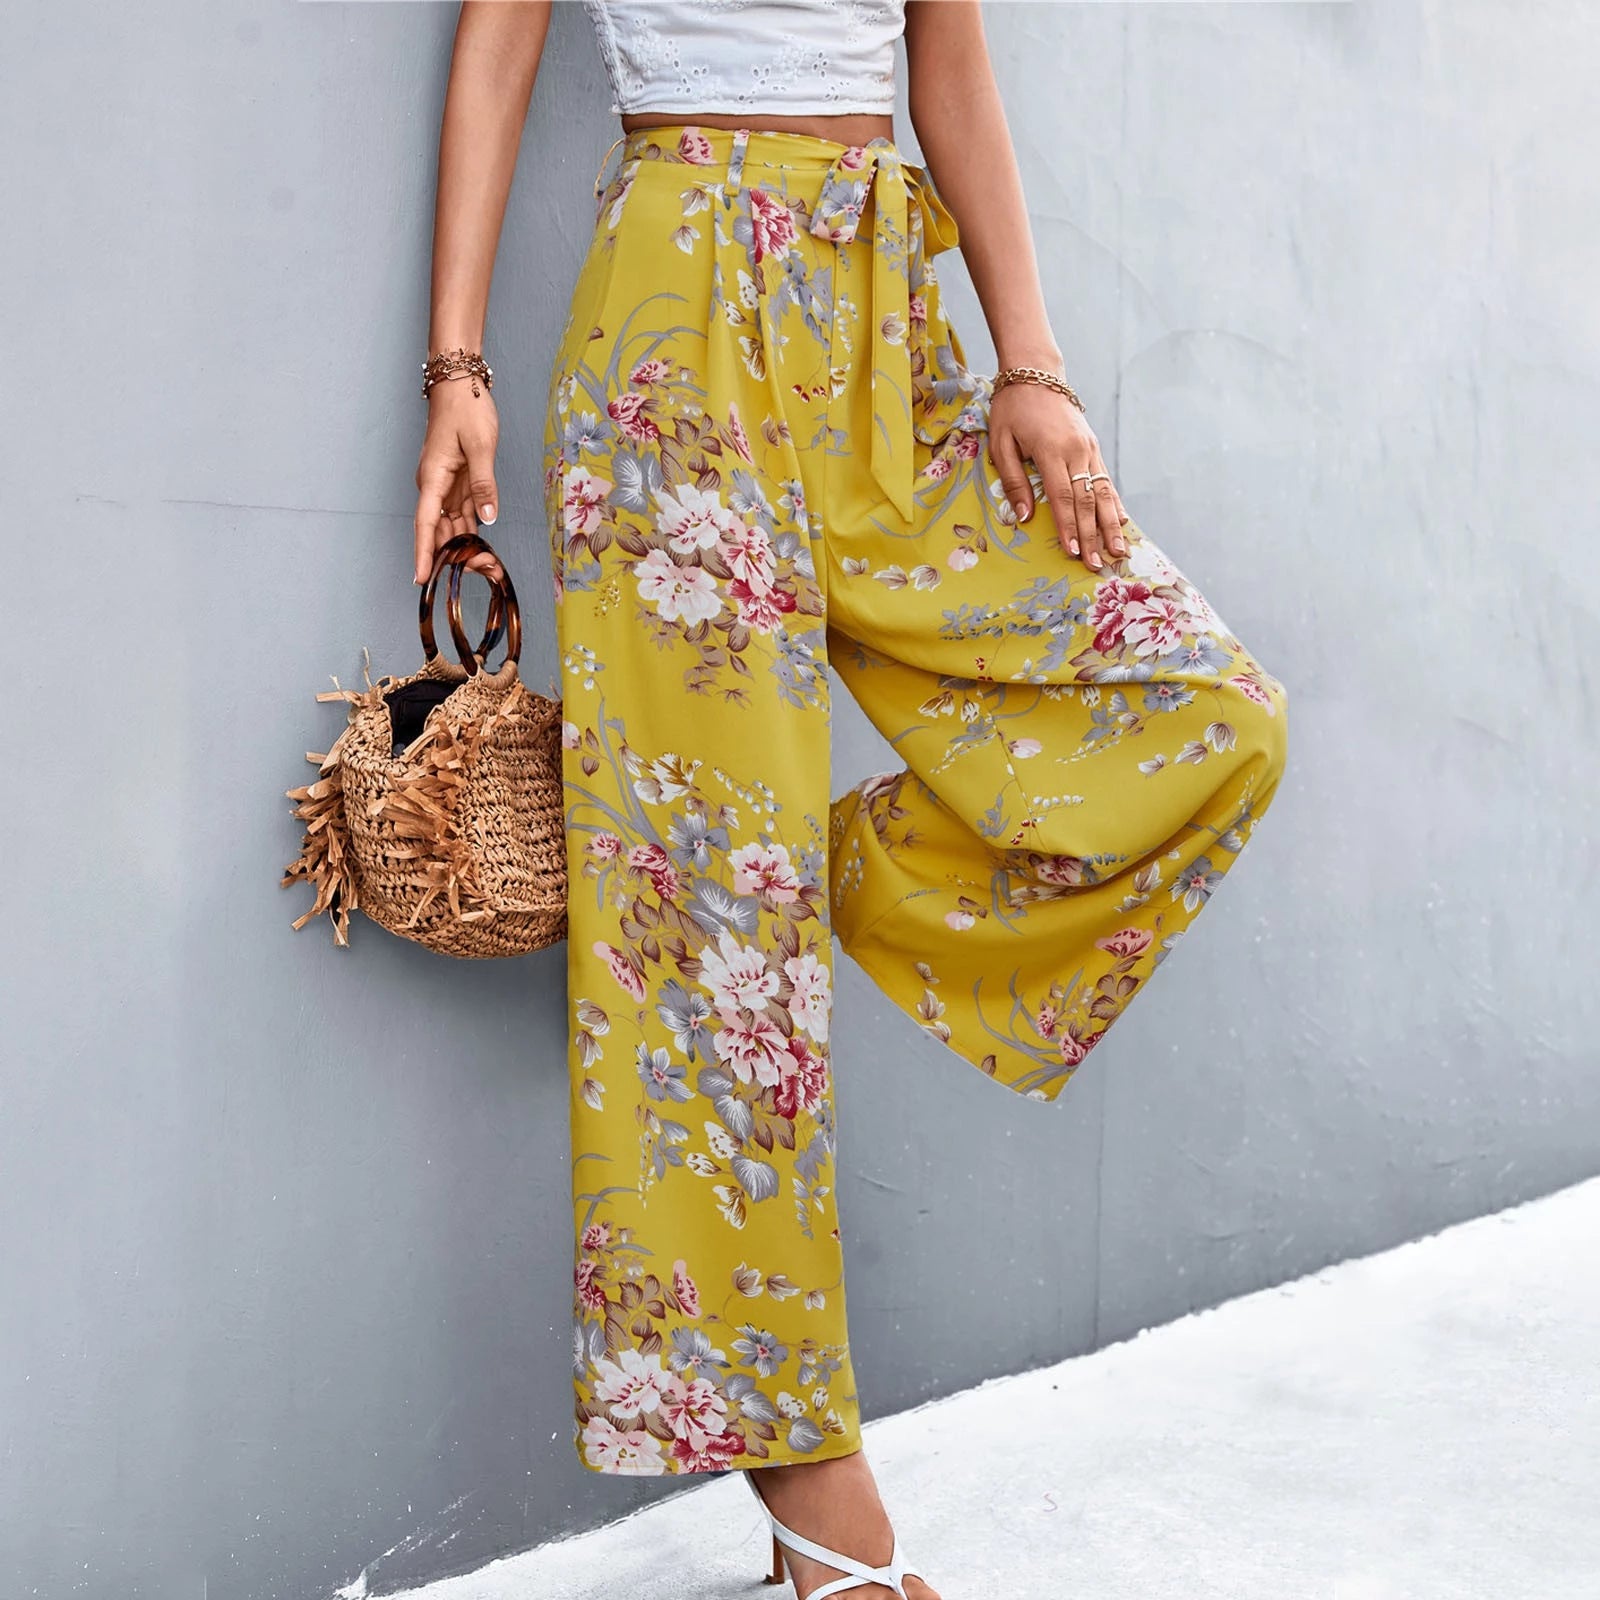 Lace Up Wide Leg Casual Printed Pants - DUVAL